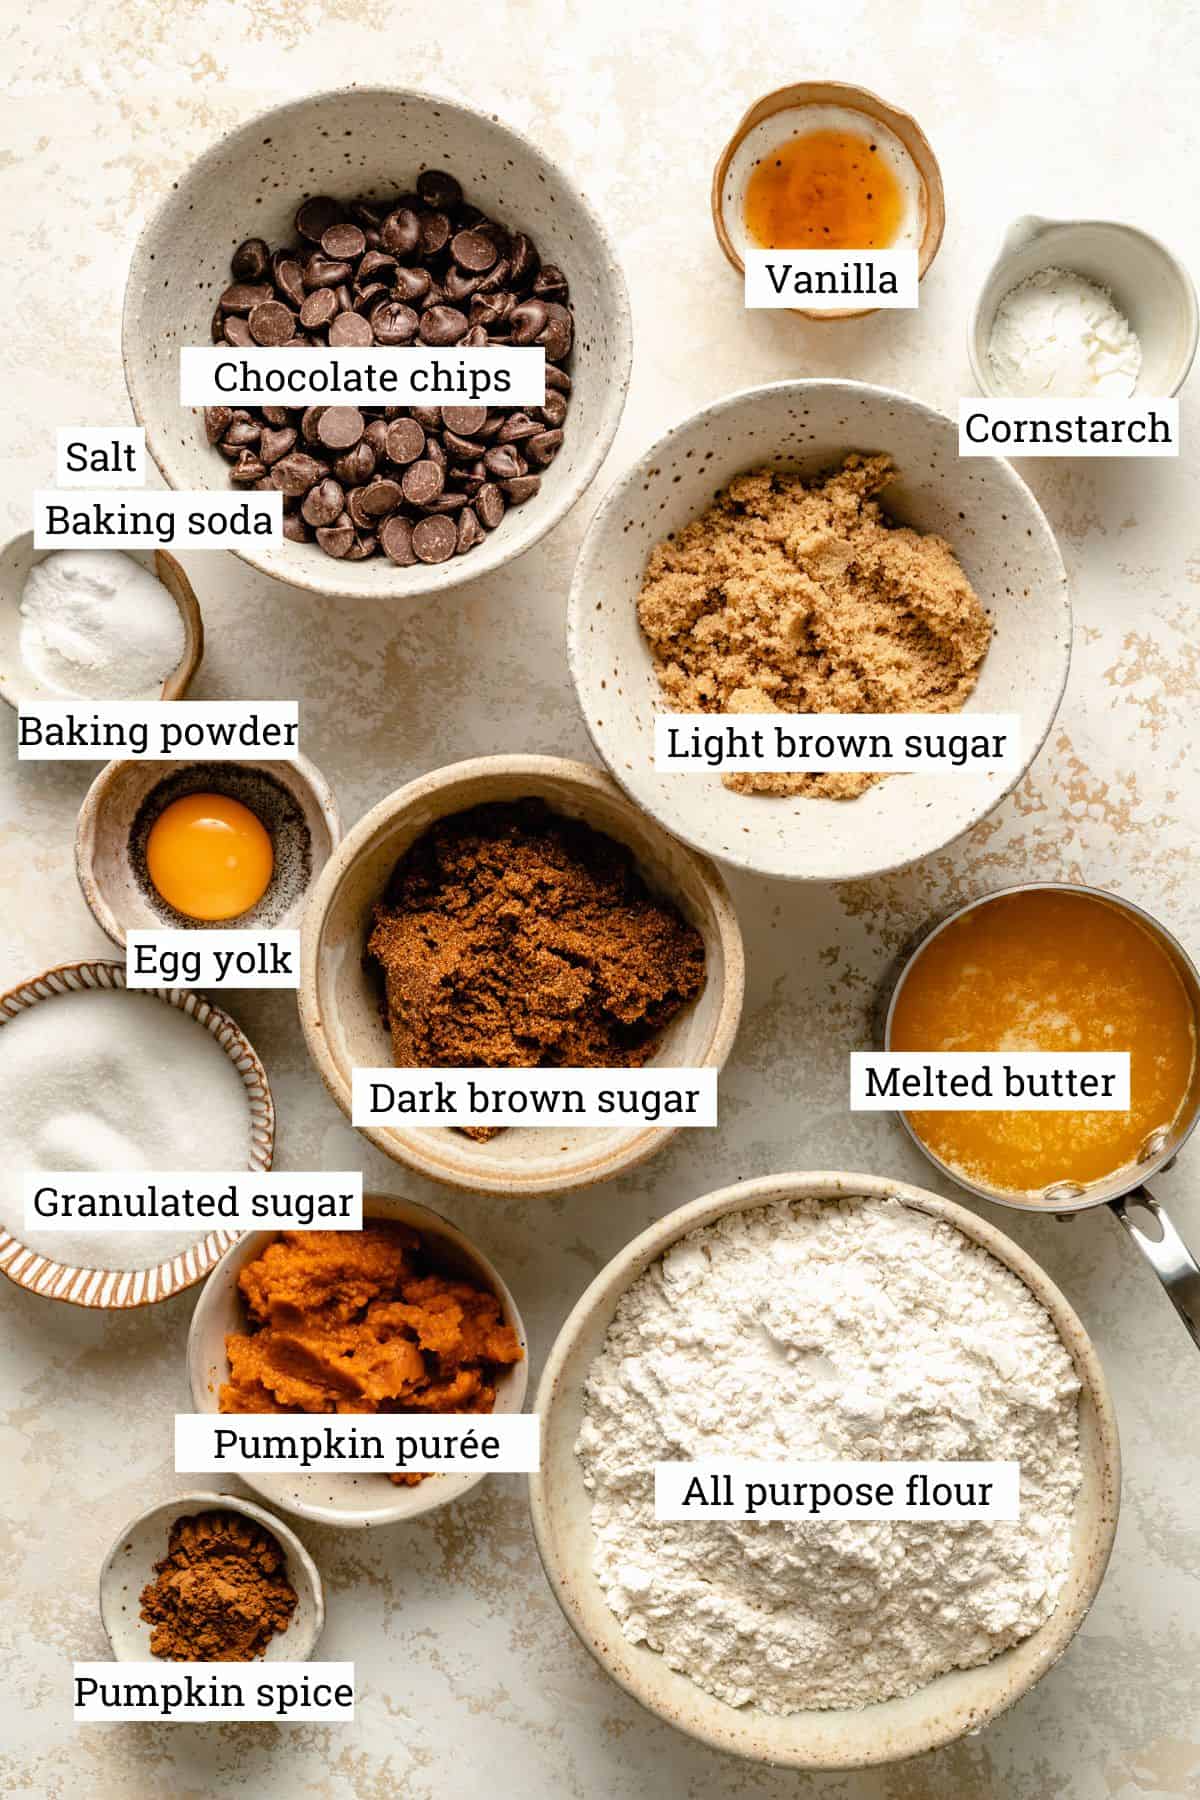 Ingredients in various bowls for cookies, including flour, sugar, eggs and butter.